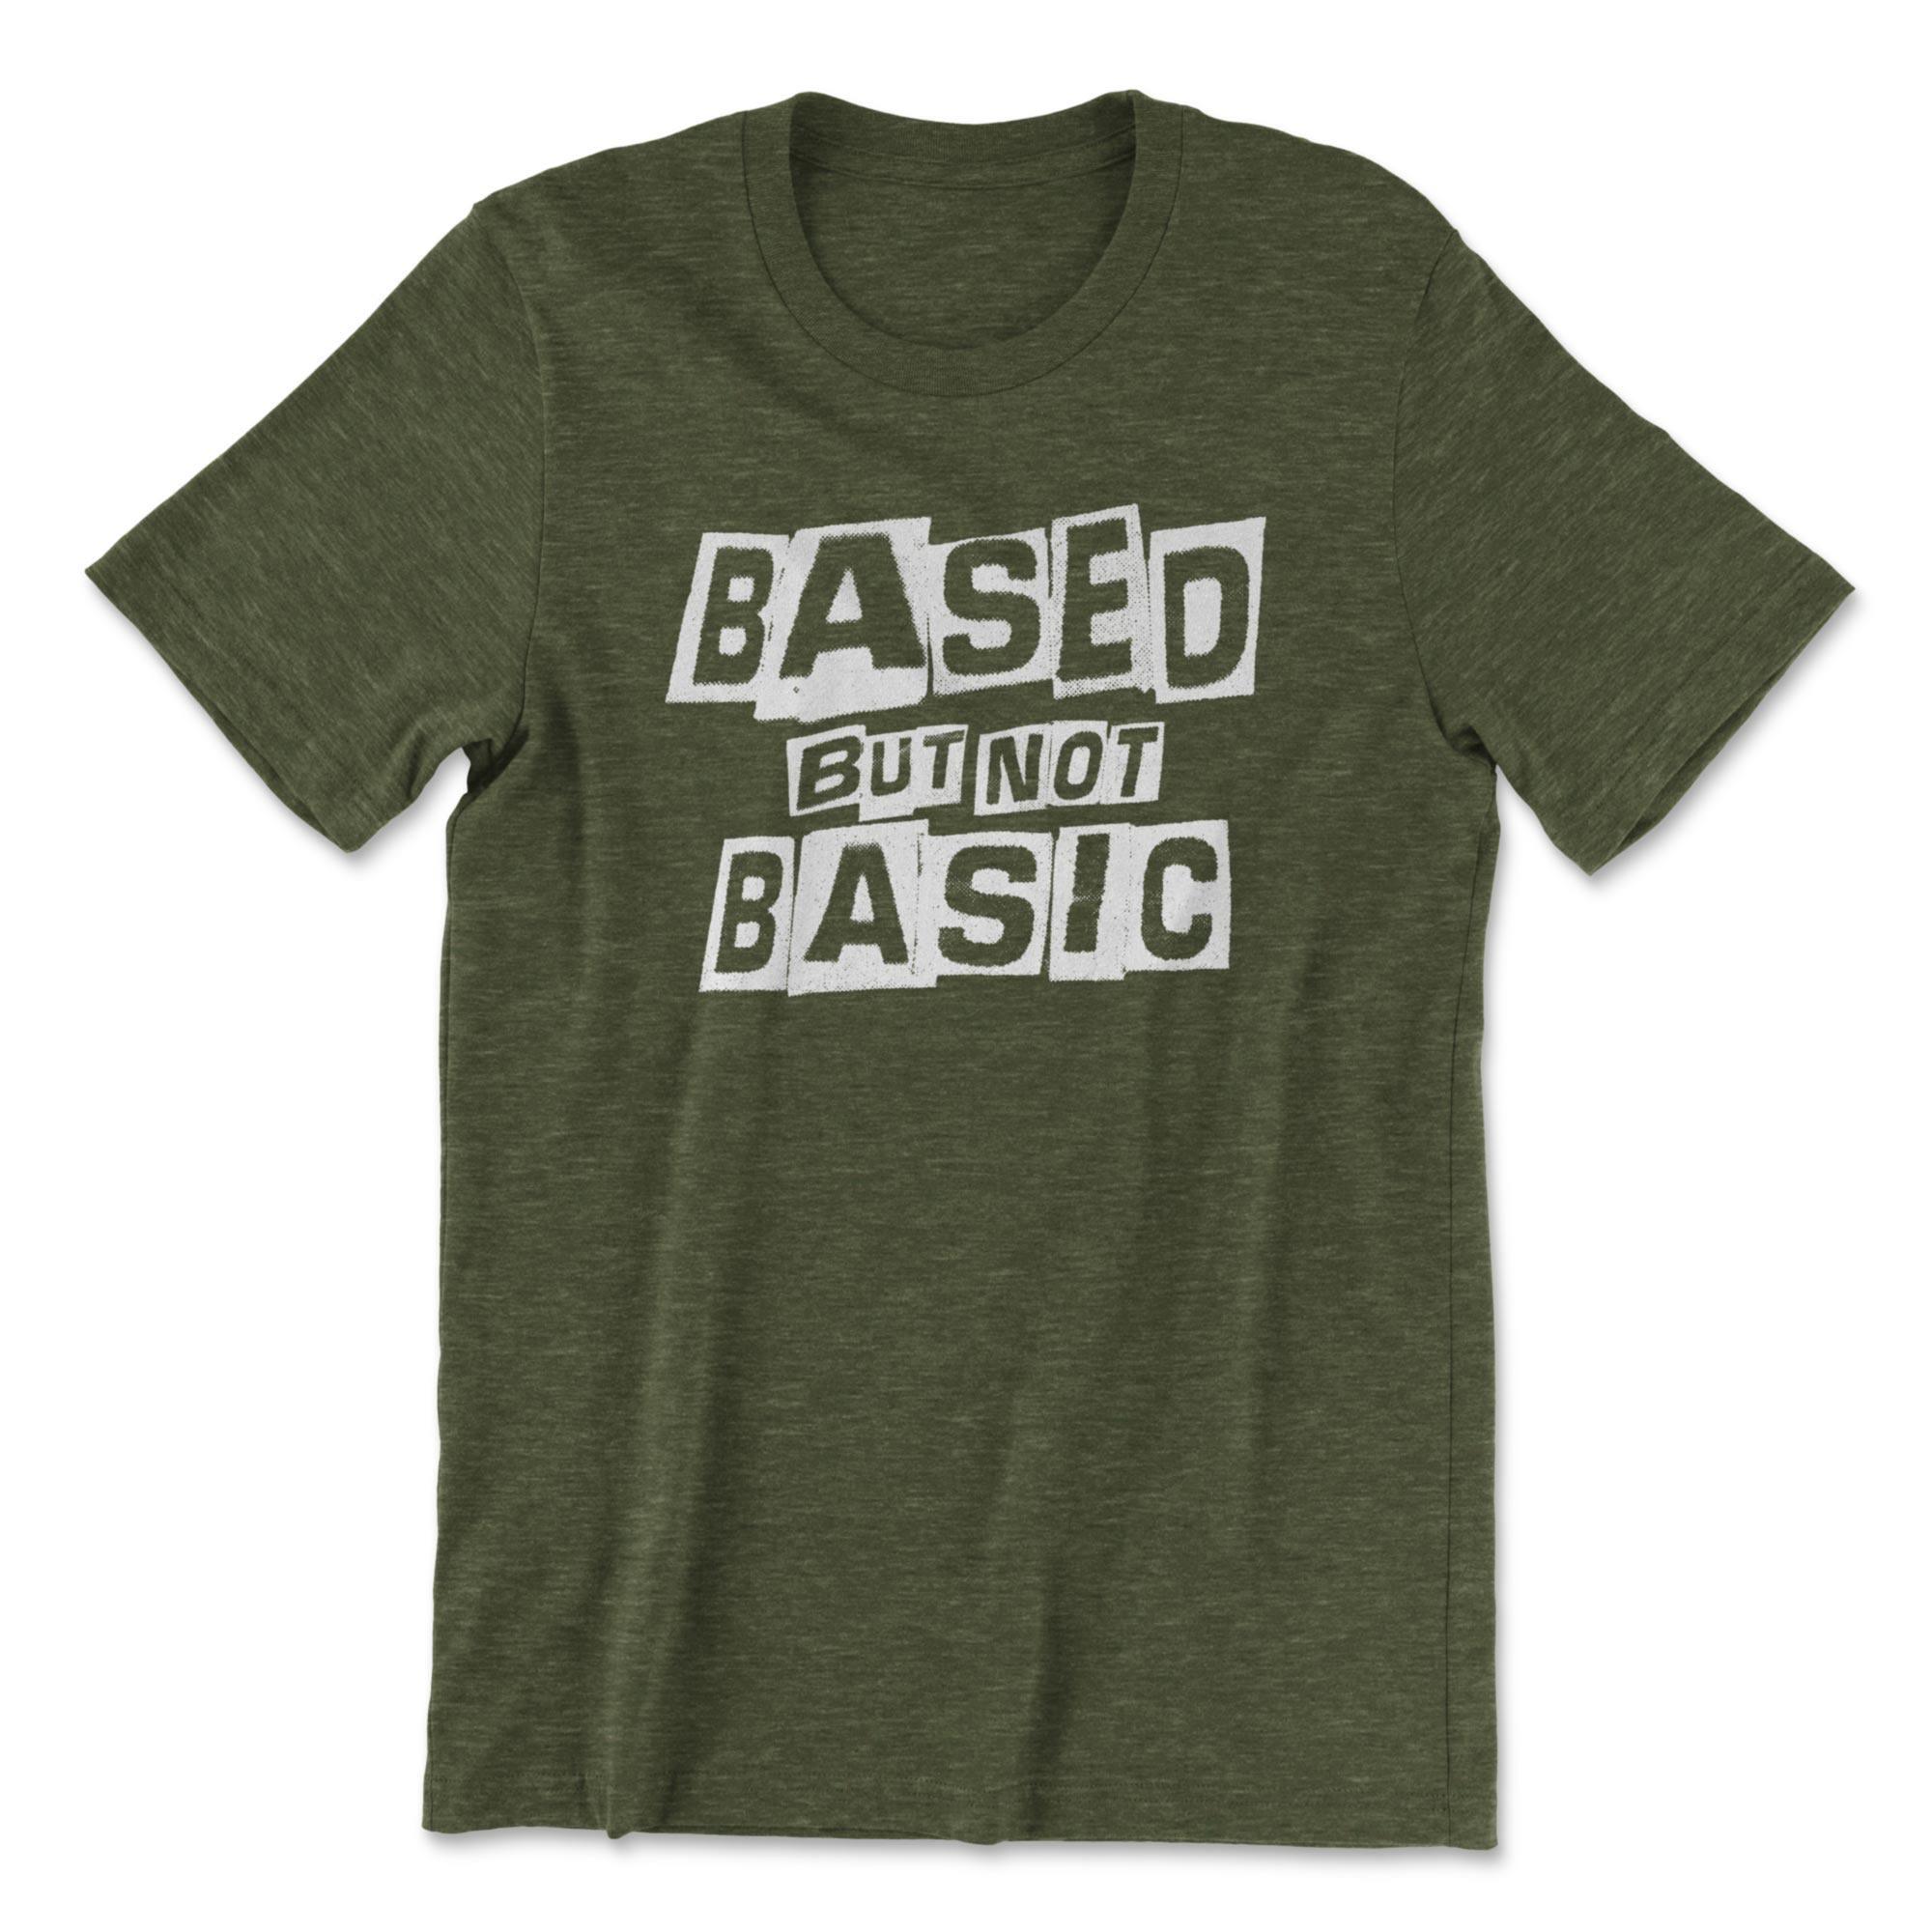 Based But Not Basic - No System